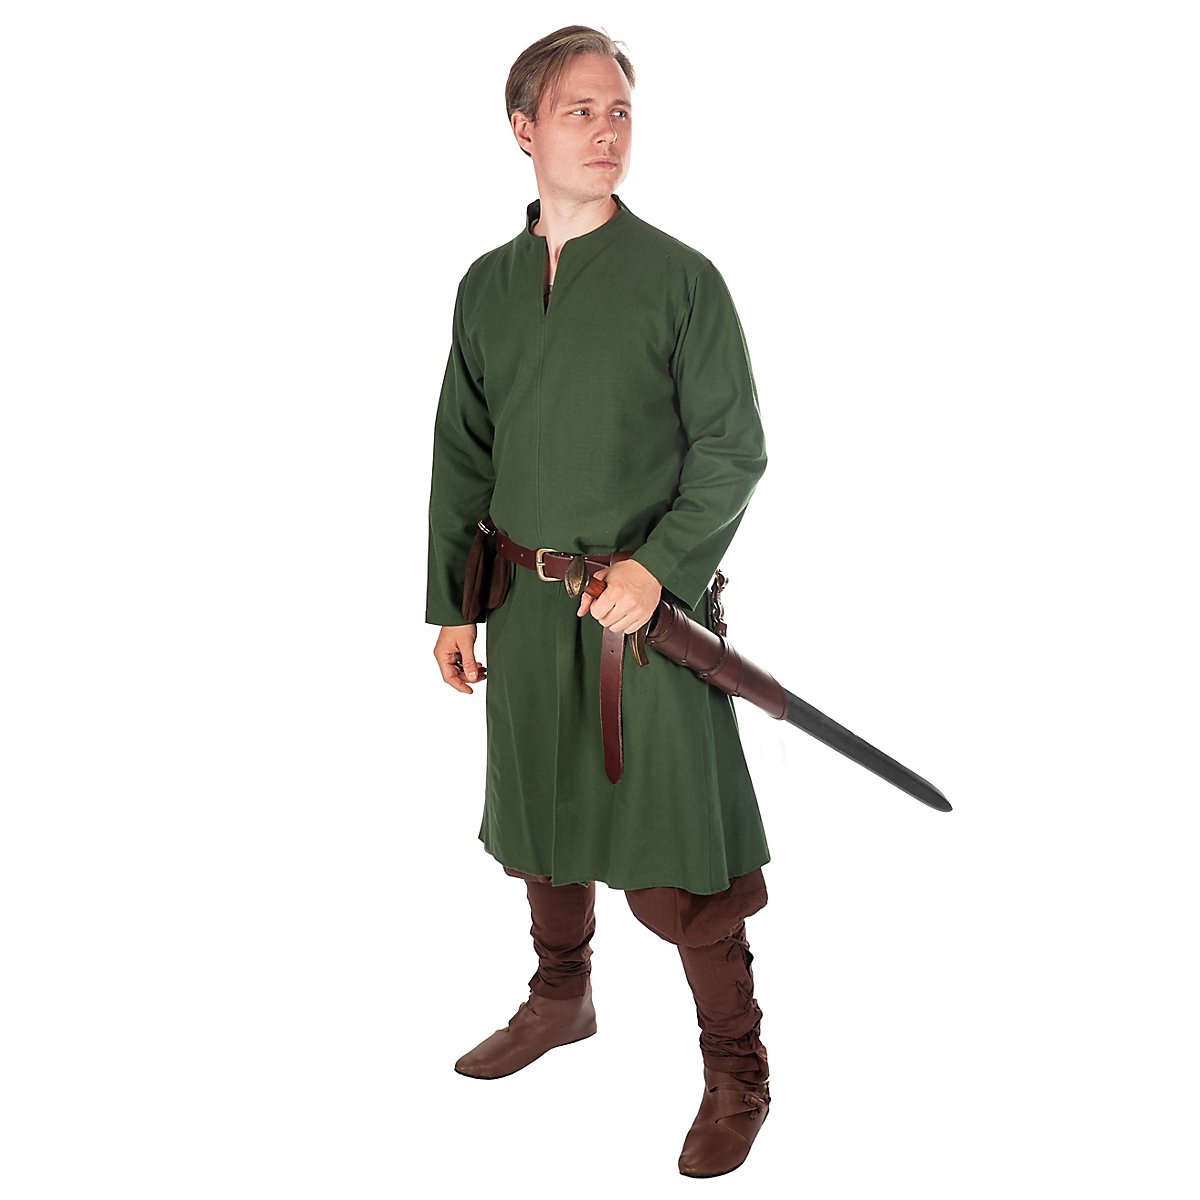 Medieval tunic - Dietrich - andracor.com